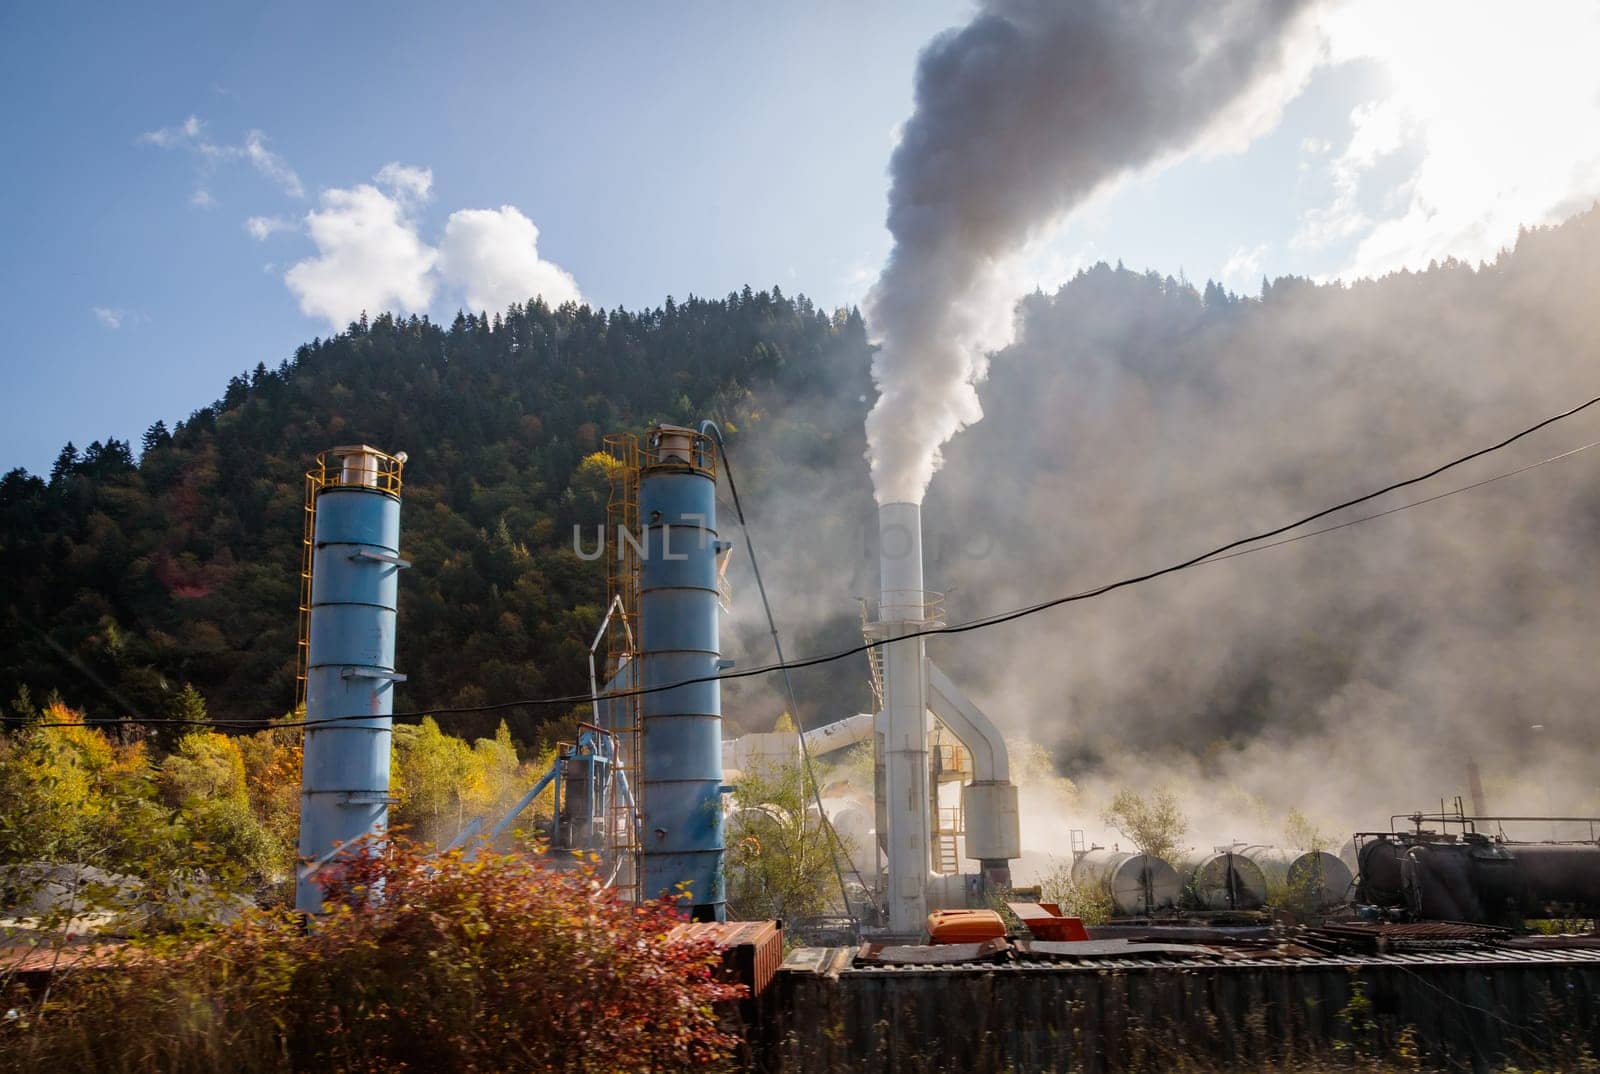 Industrial landscape with smoking factory chimneys on the background of mountainous terrain, reflecting the impact of human activity on the environment